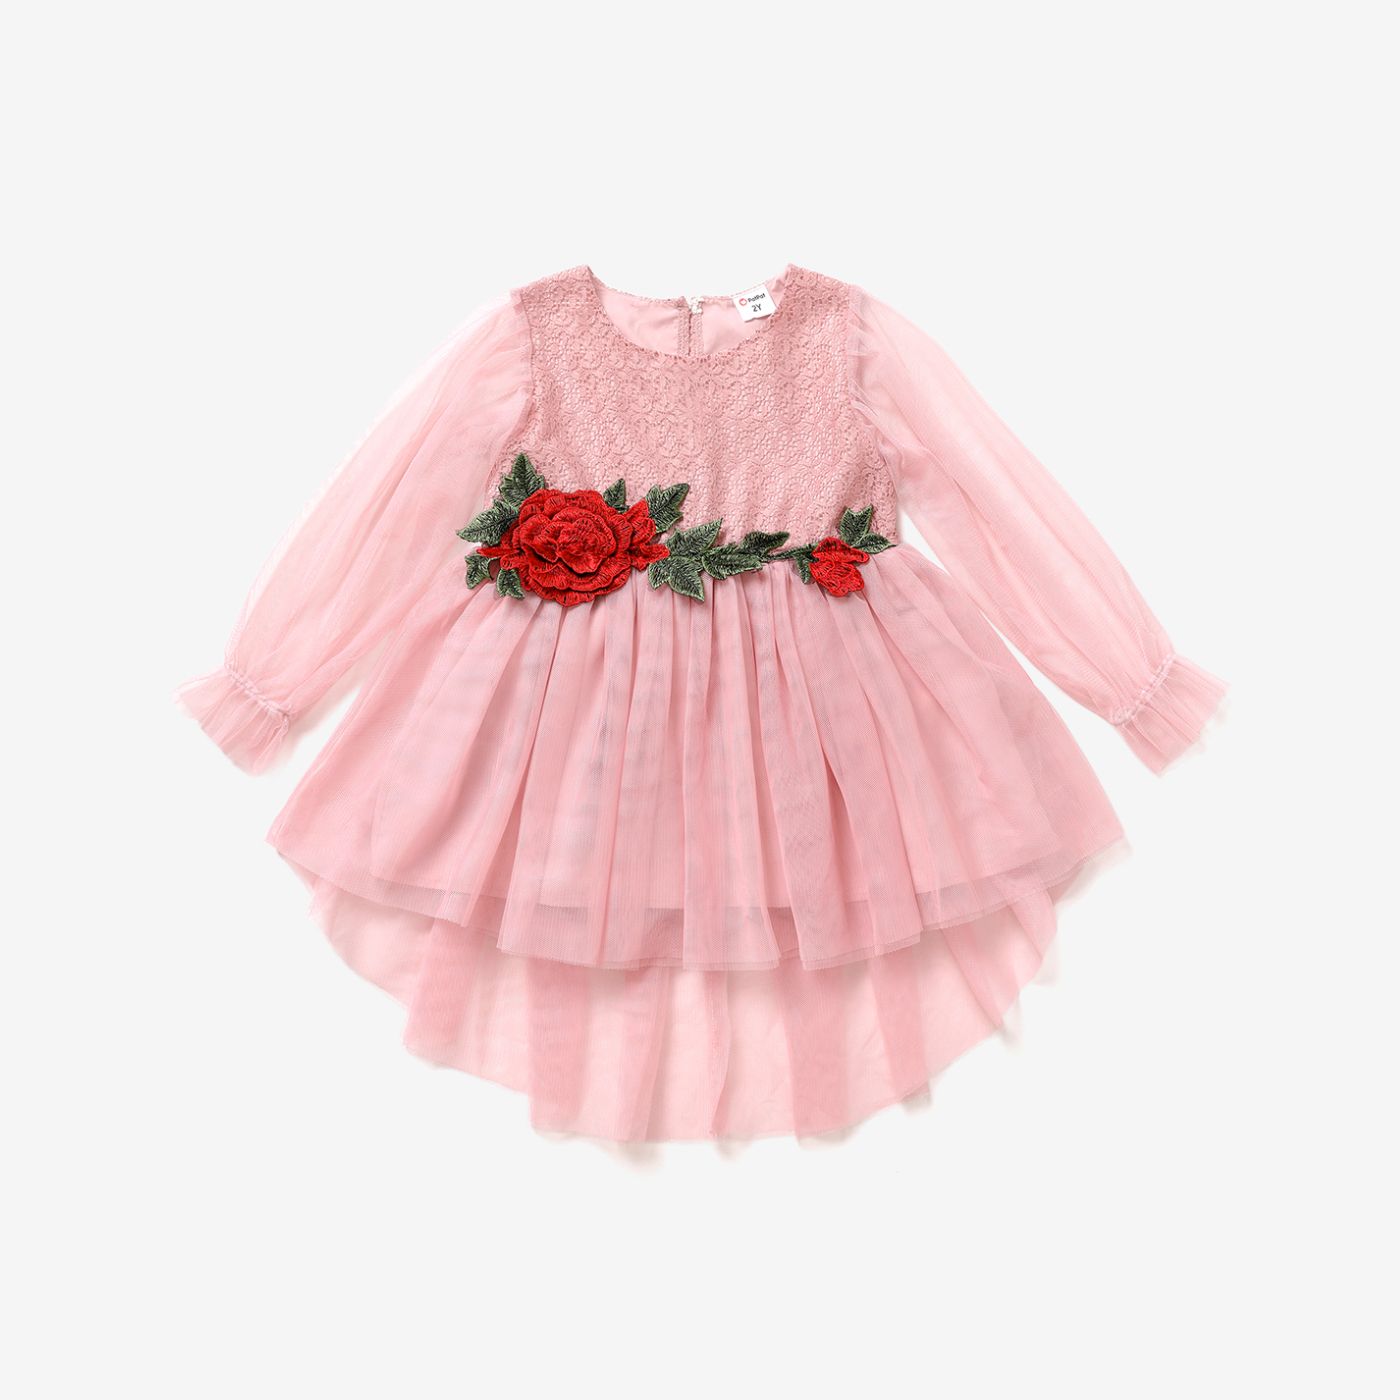 Toddler Girl Multi-layered Opaque Lace And Mesh Design Fairy Dress